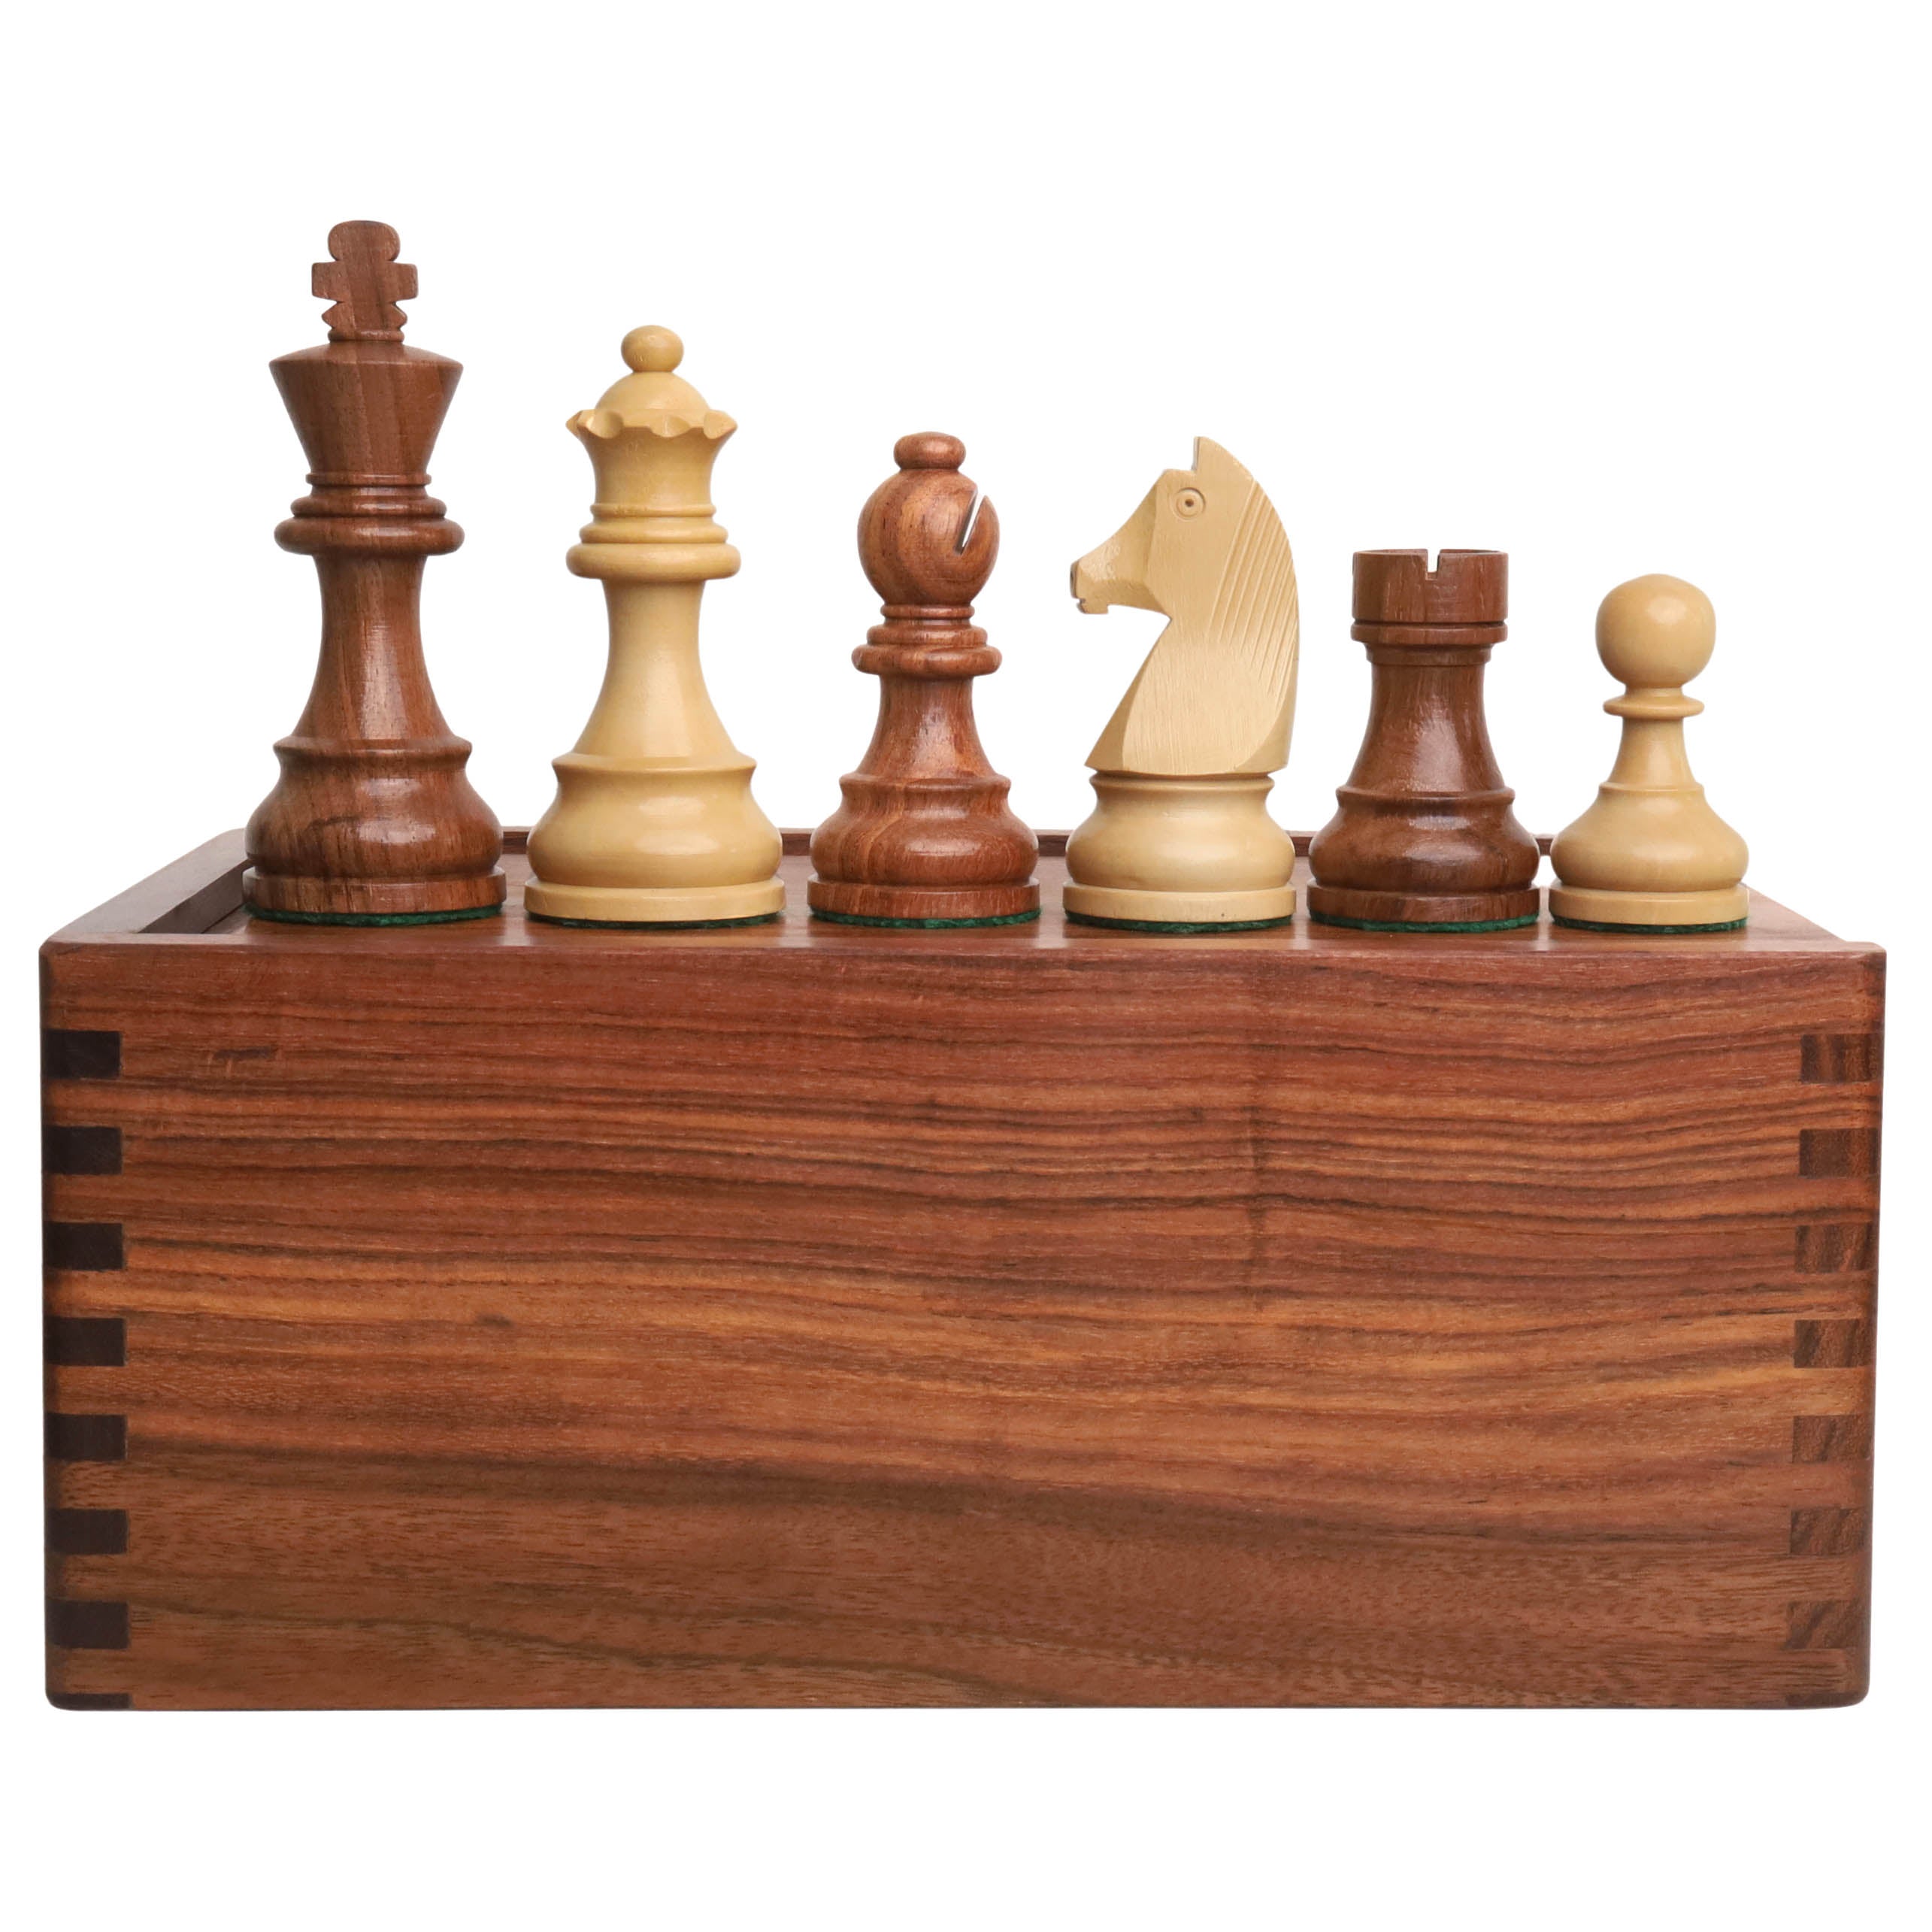 The Grandmaster Chess Set and Board Combination - Blue Gilded